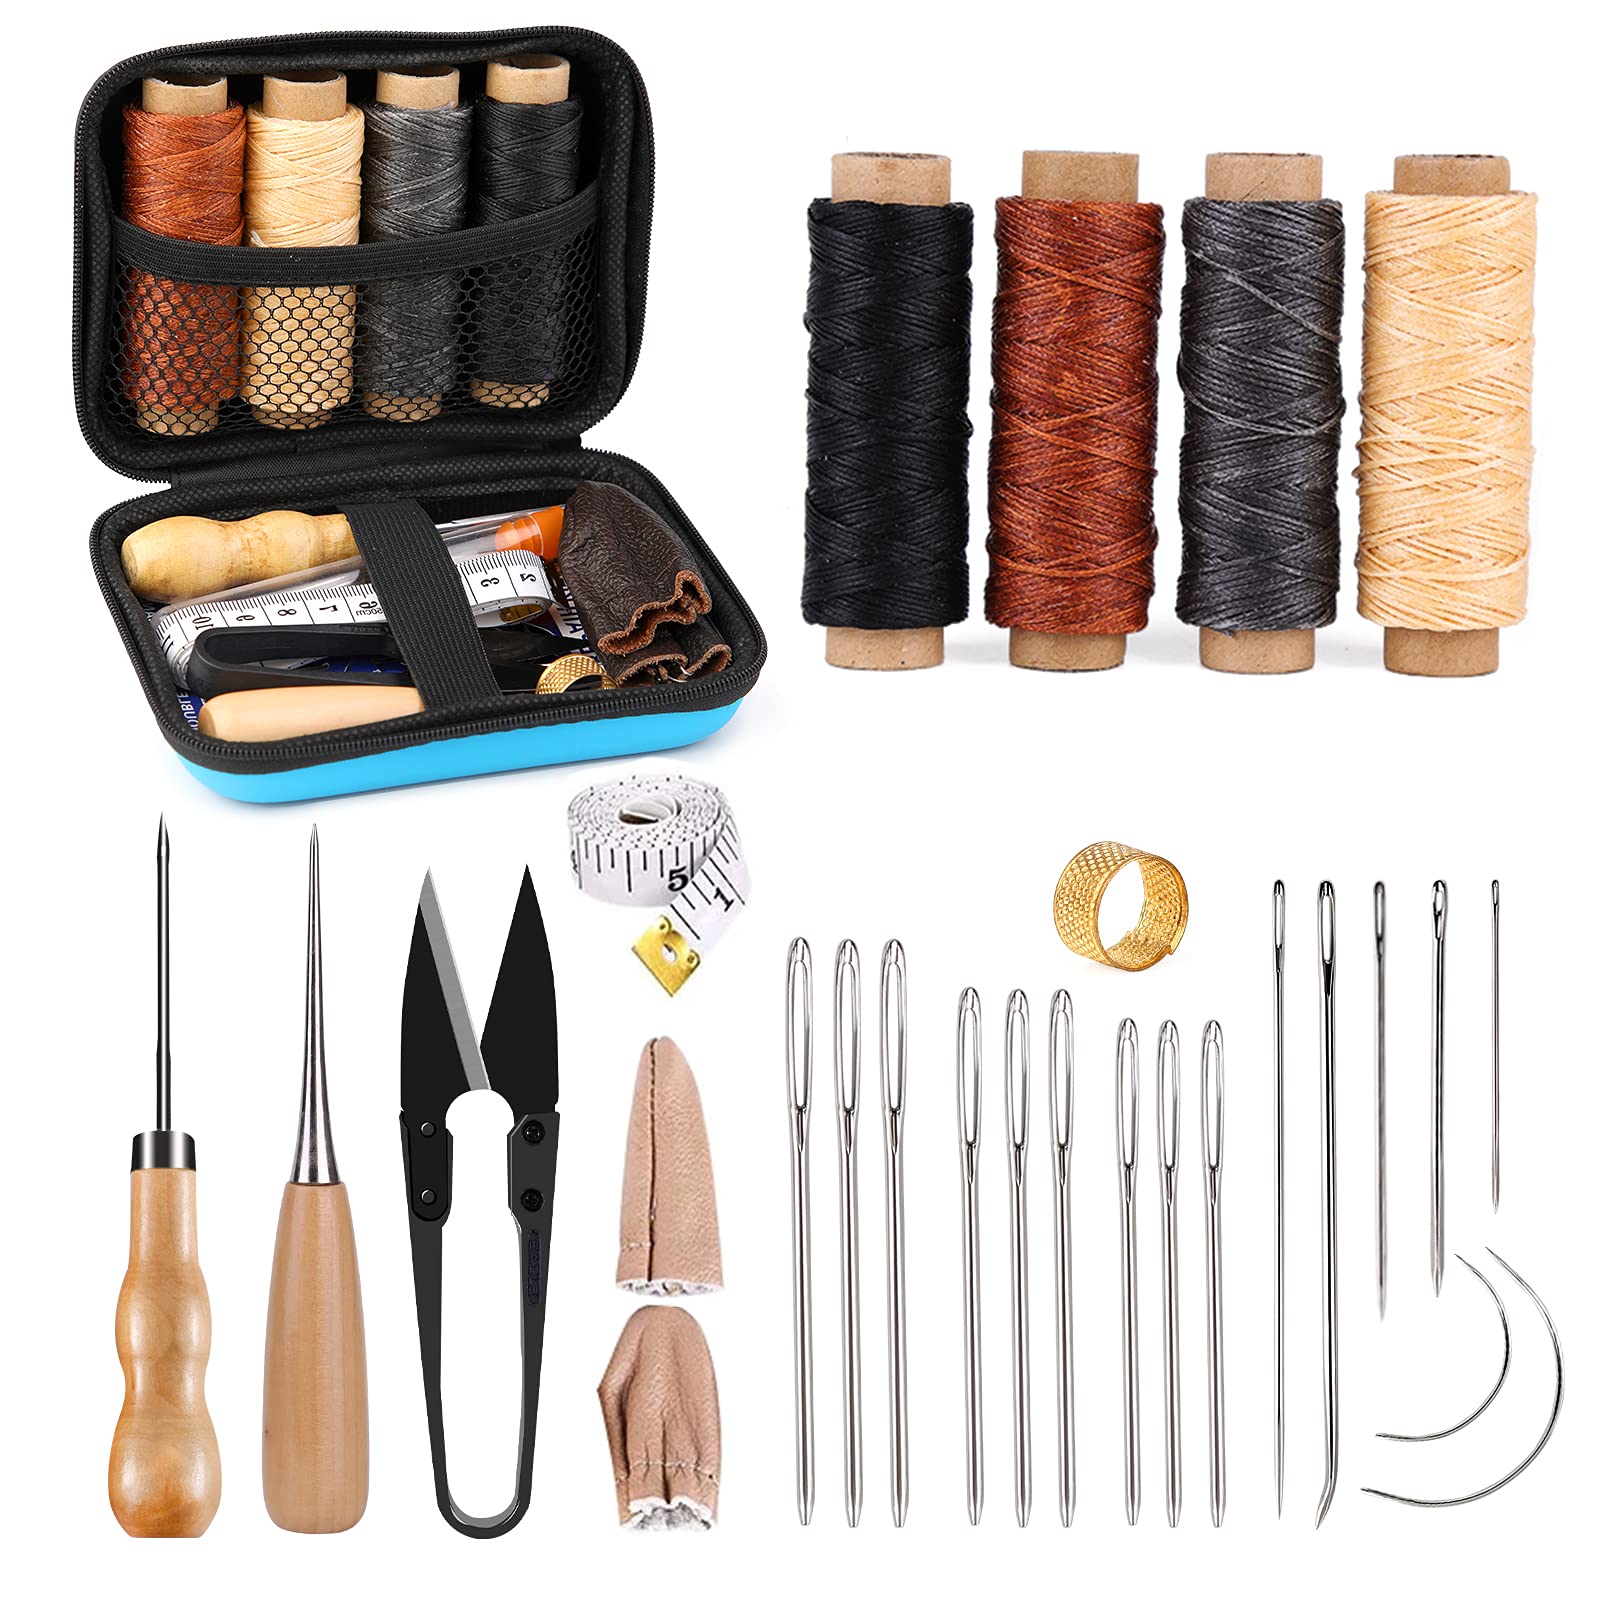 Leather Sewing Kit, Leather Working Tools and Supplies, Leather